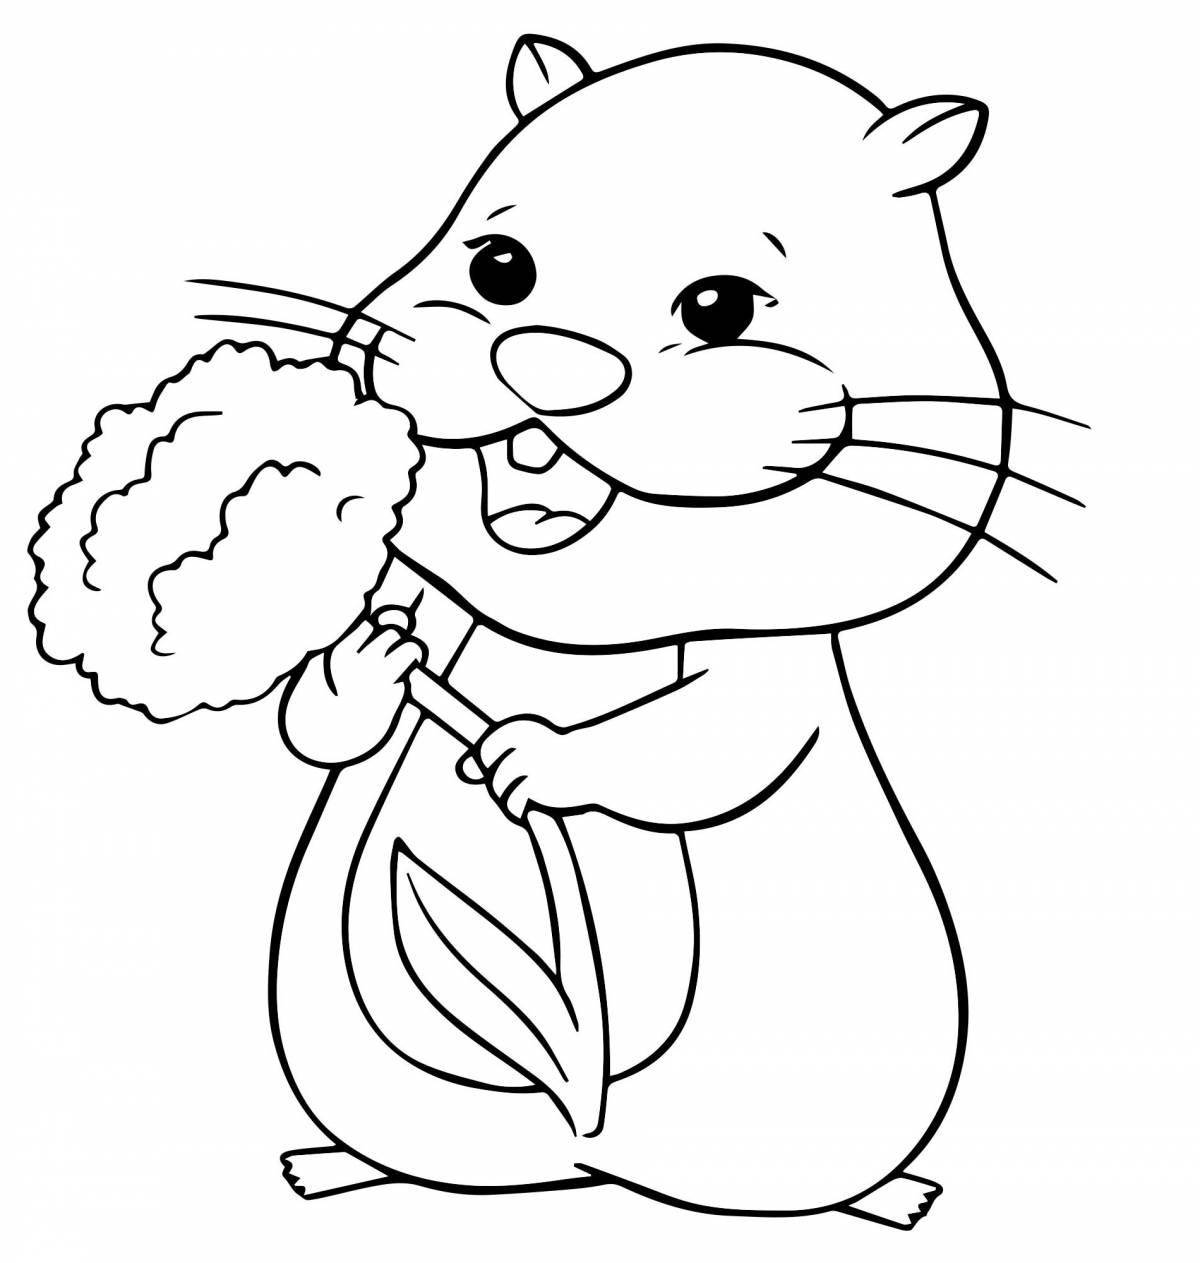 Coloring page adorable hamster